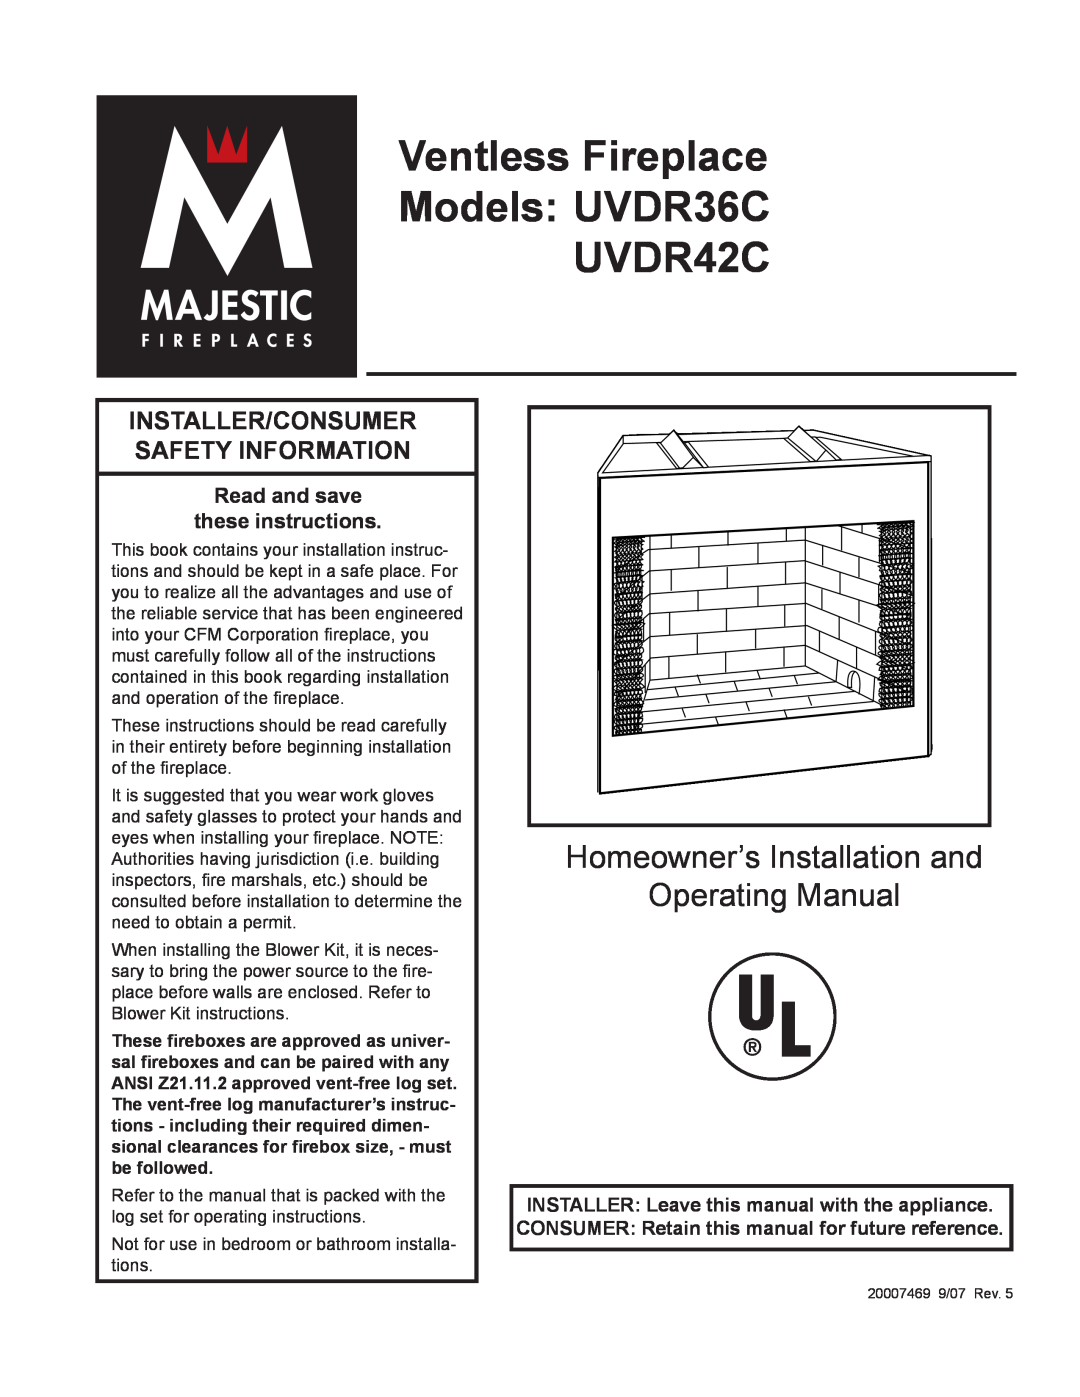 CFM Corporation installation instructions Ventless Fireplace Models UVDR36C UVDR42C, Read and save these instructions 